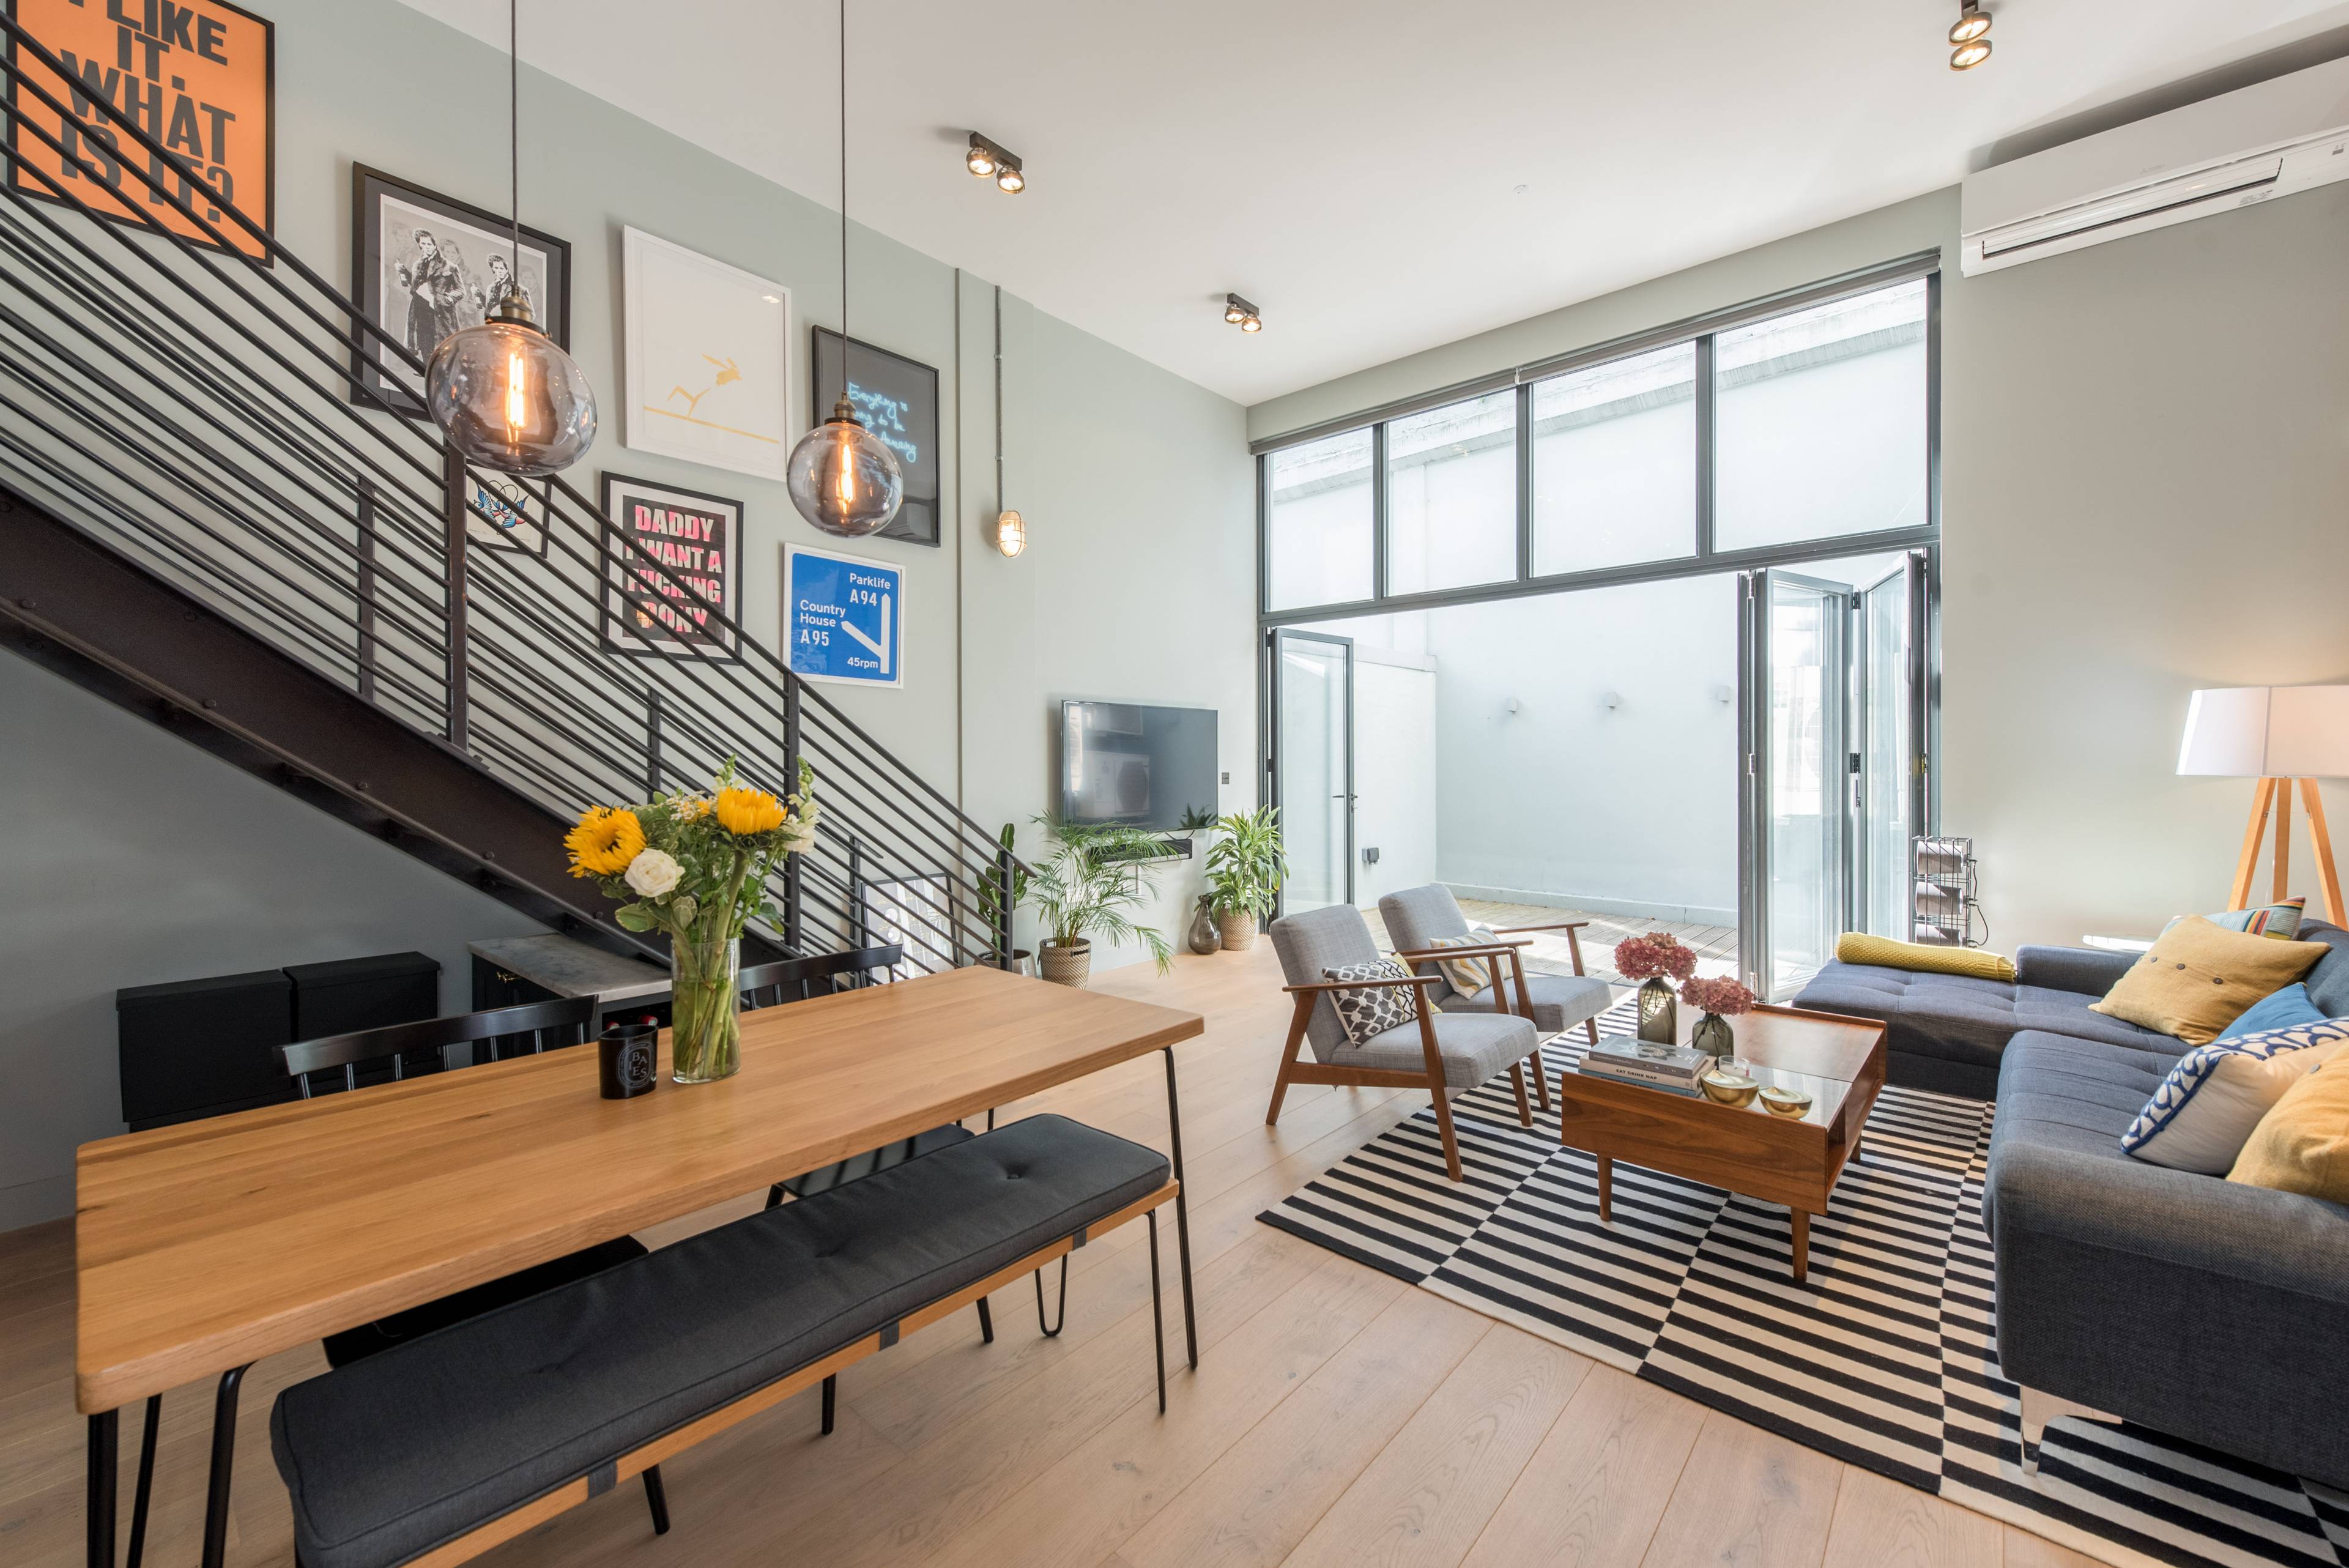 Stunning Double Height Loft - Northbourne Road, London, SW4